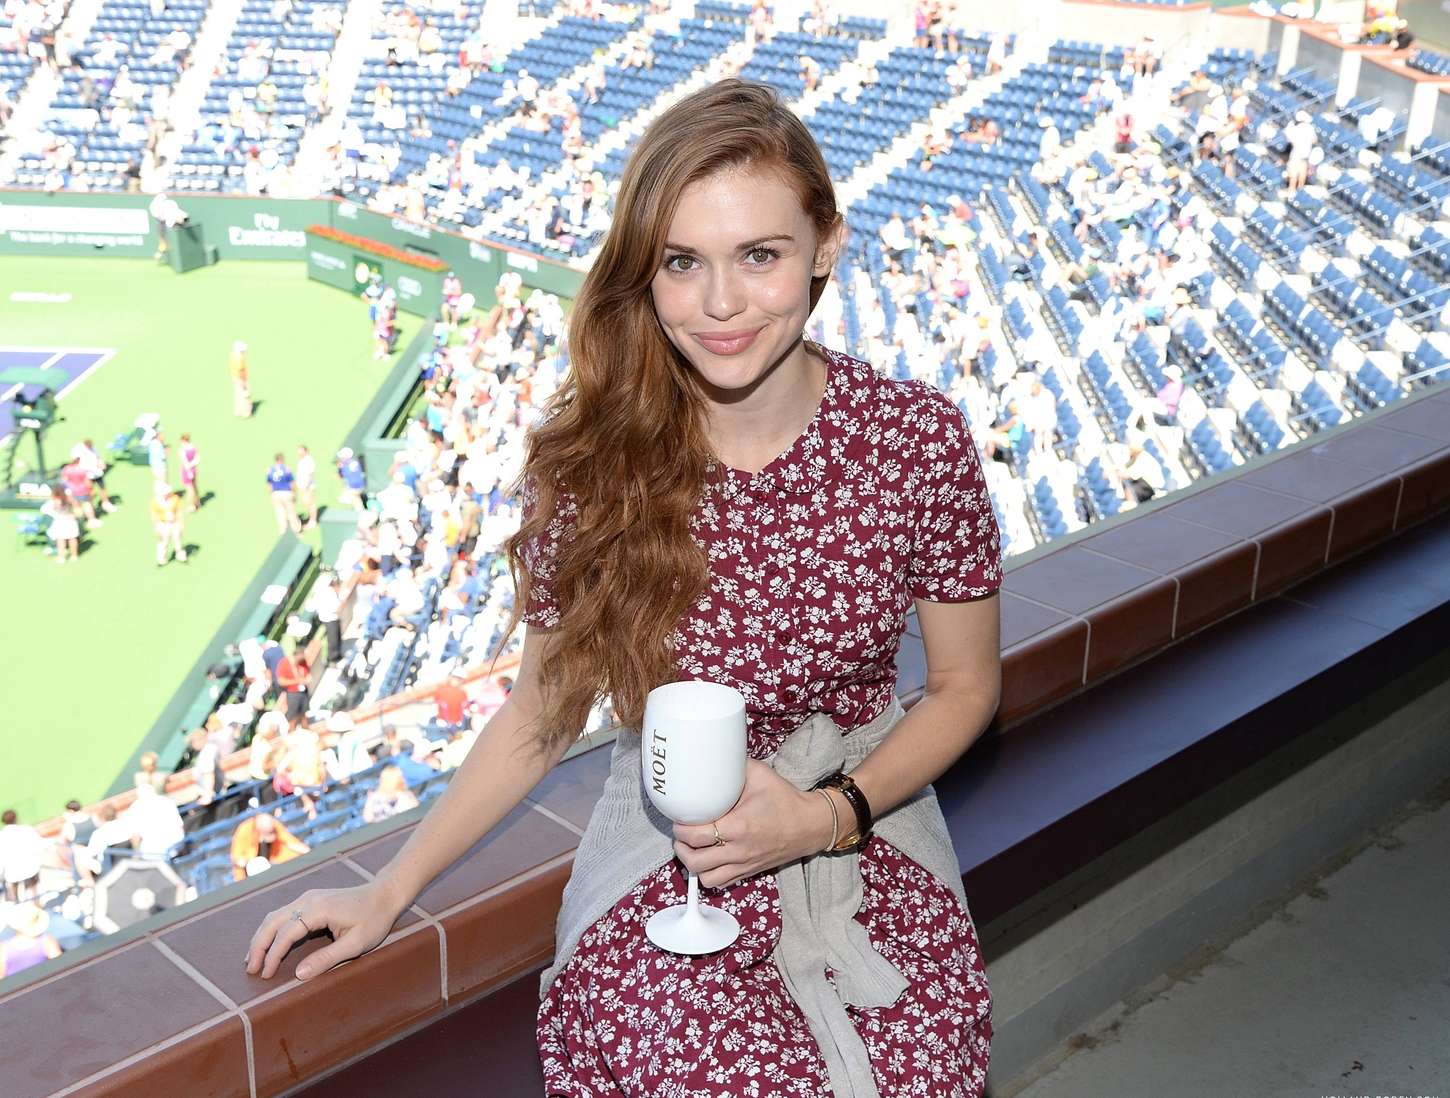 Holland-Roden_-The-Moet-and-Chandon-Suite-at-2015-BNP-Paribas-Open--08.jpg